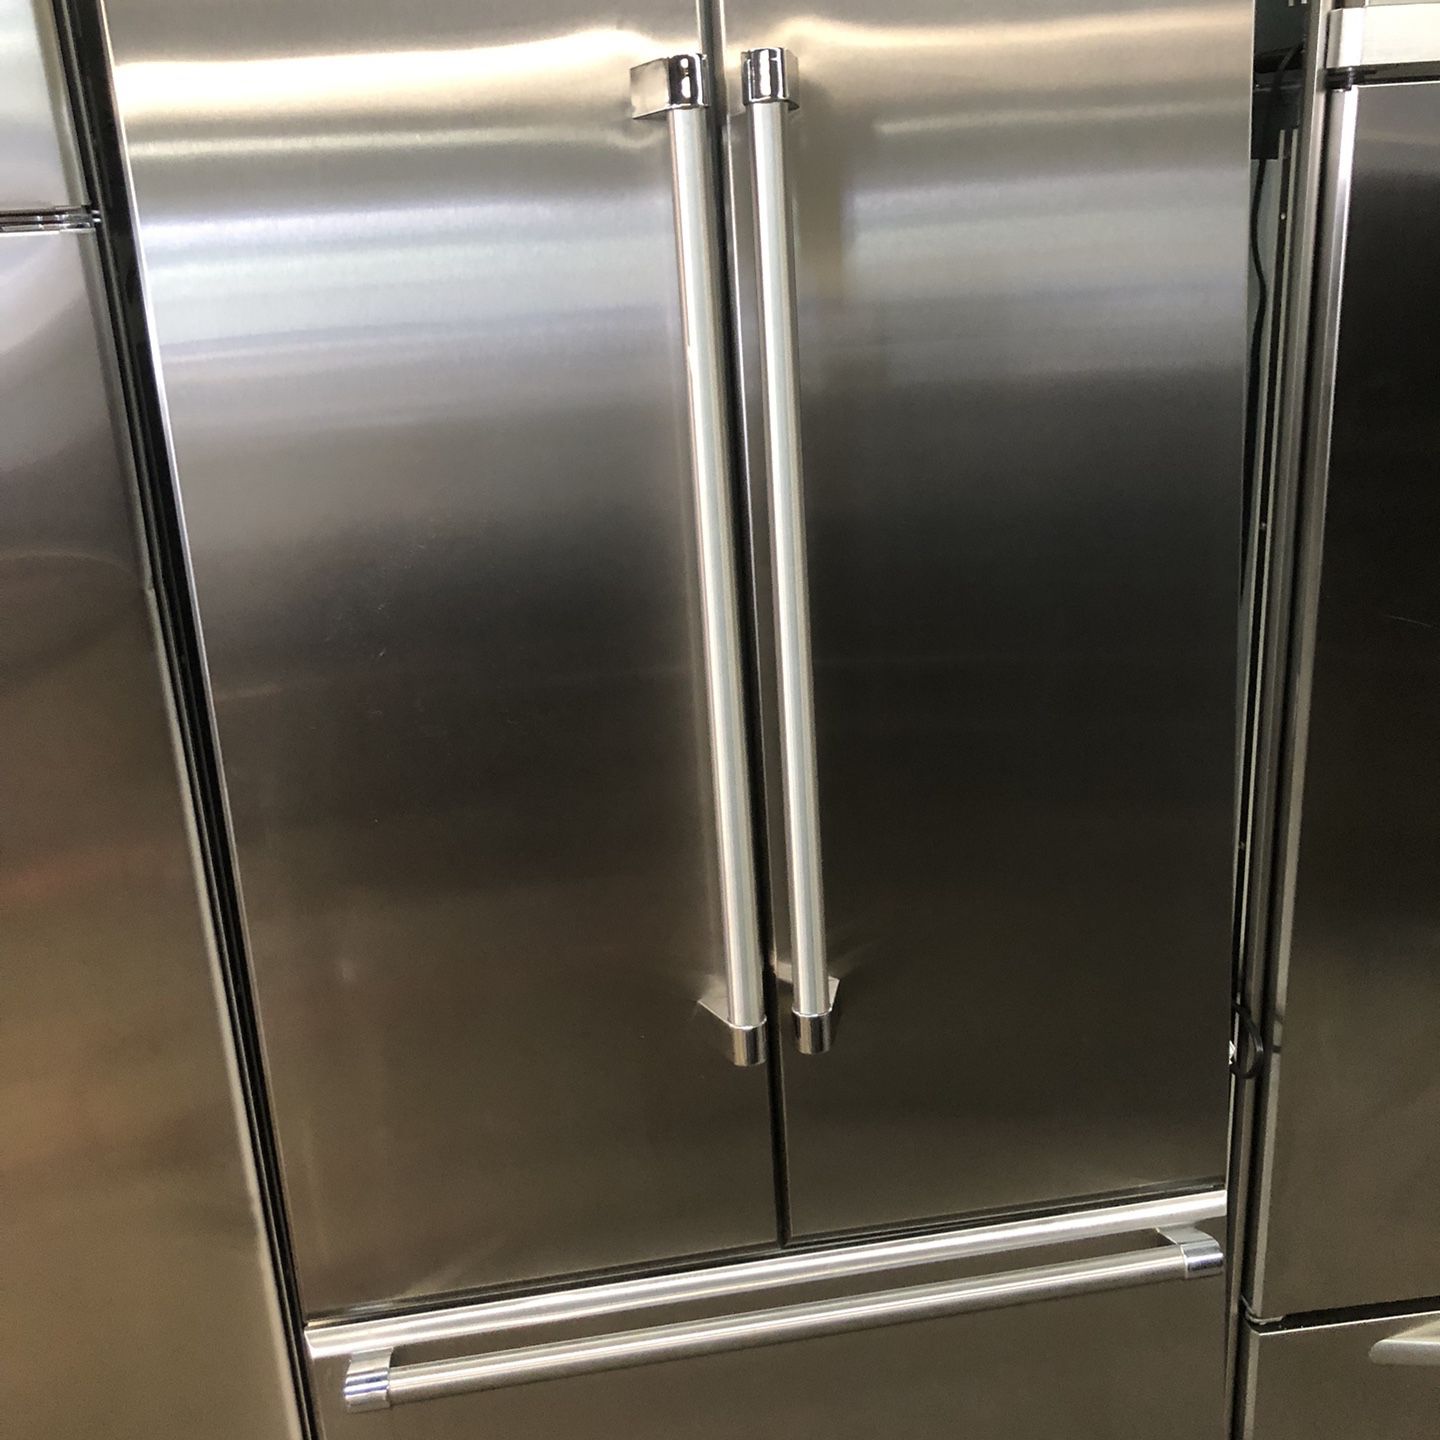 Thermador 36” Stainless Steel Built In French Door Refrigerator 